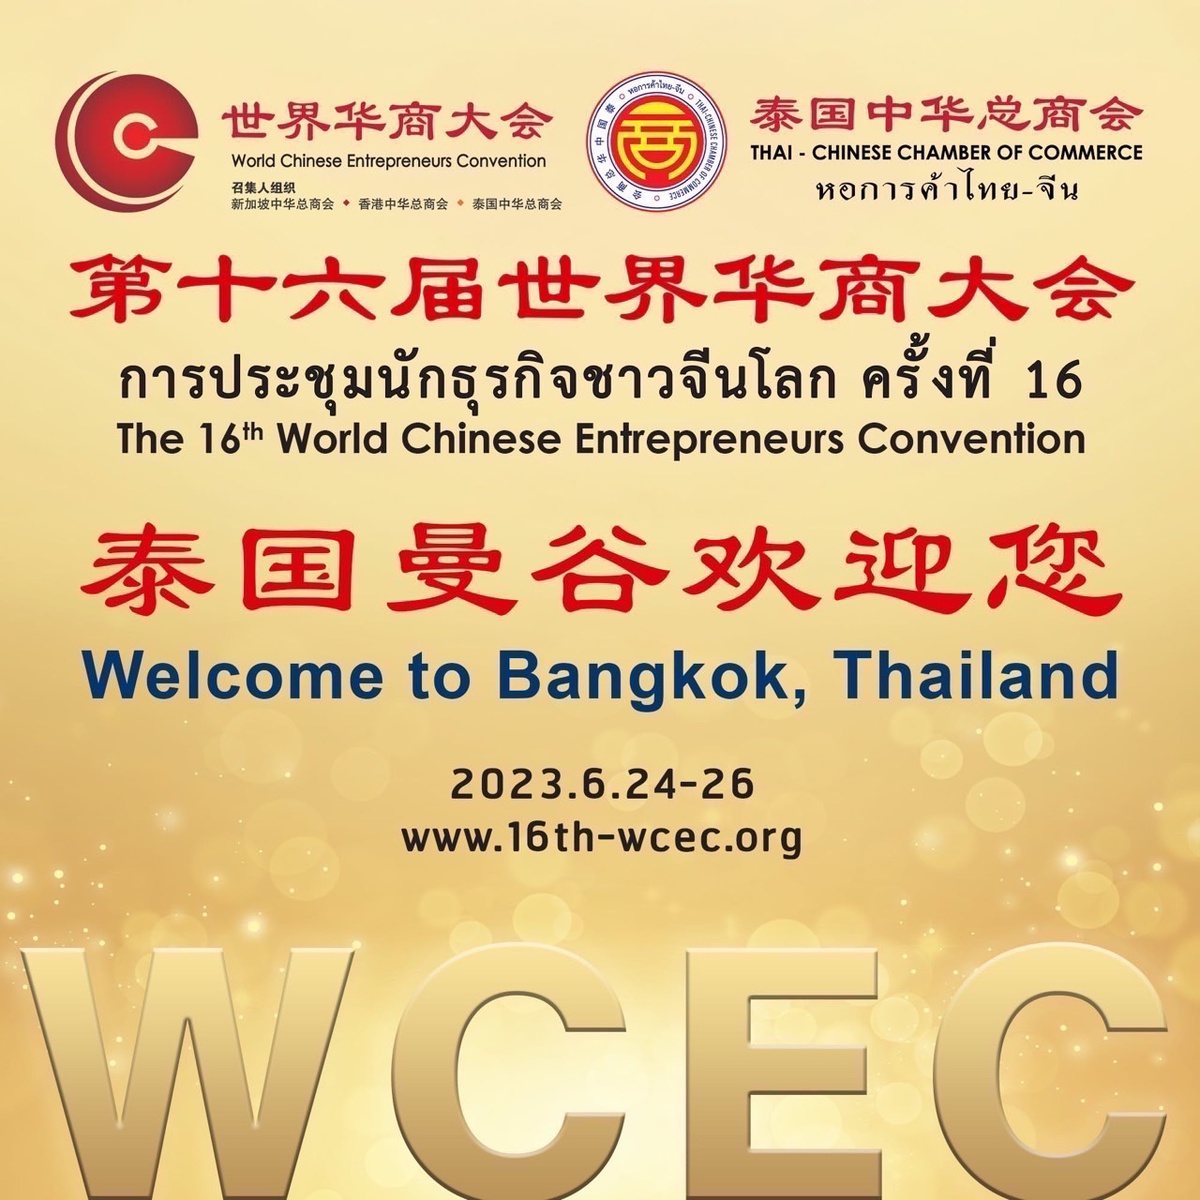 QSNCC ready to host The 16th World Chinese Entrepreneurs Convention to strengthen Thai-Chinese business partnership and revive world